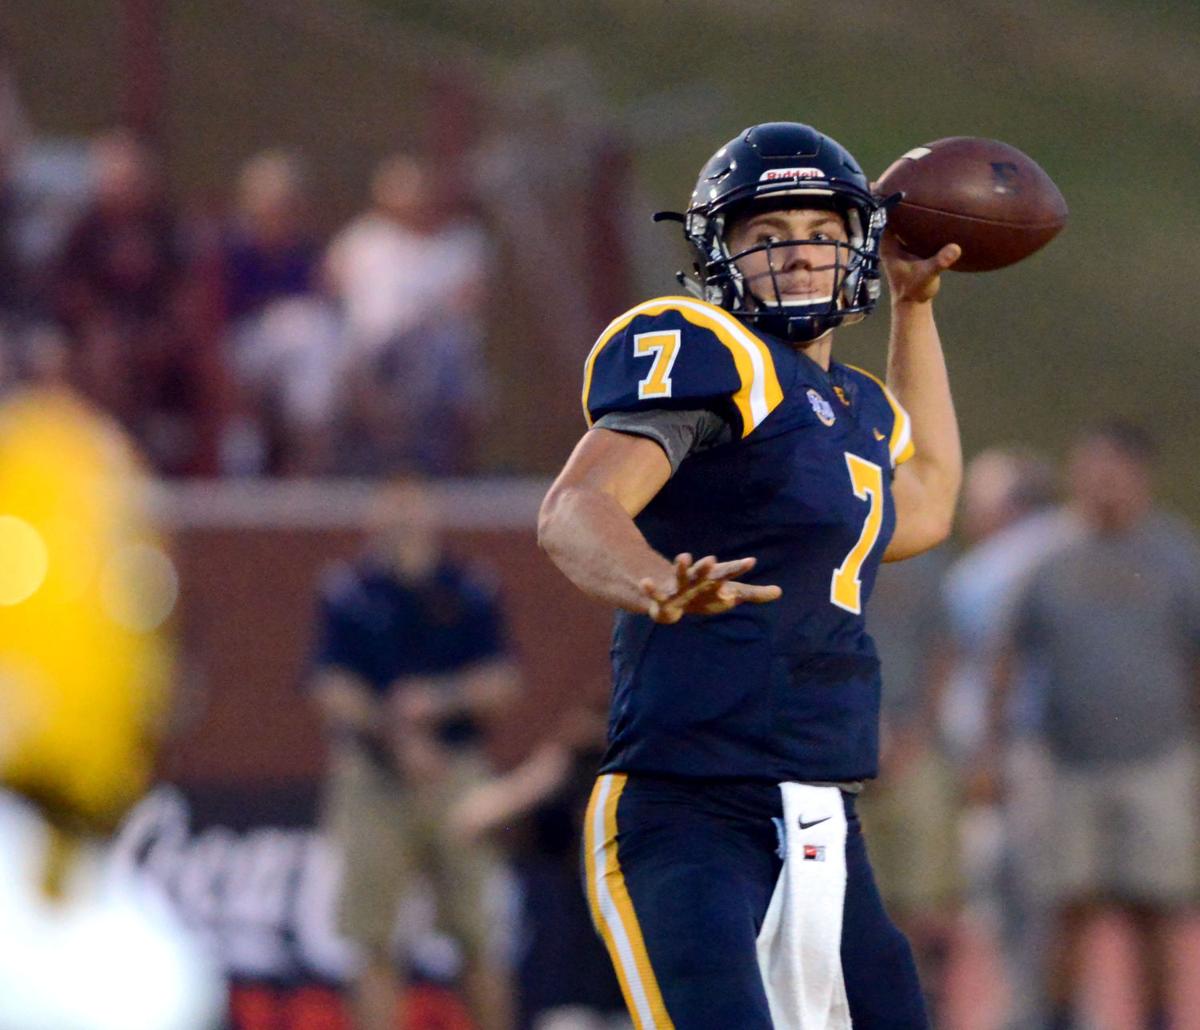 ETSU’s first football game in 12 years turns into an Owl rout